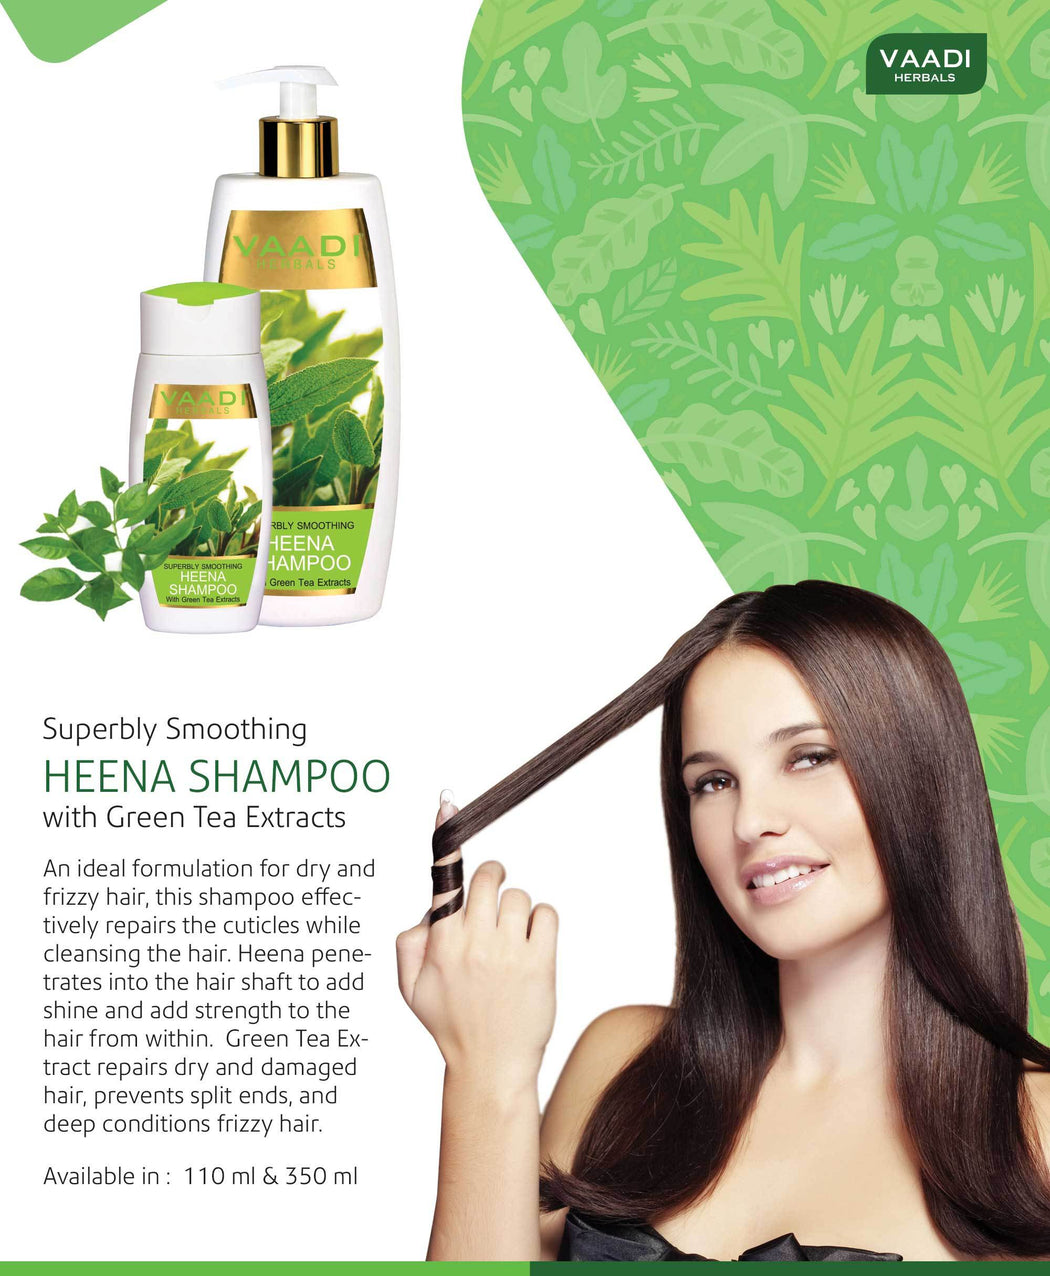 Superbly Smoothing Organic Heena Shampoo with Green Tea Extract - Controls Dry Frizzy Hair - Strengthens Hair (350 ml/12 fl oz)